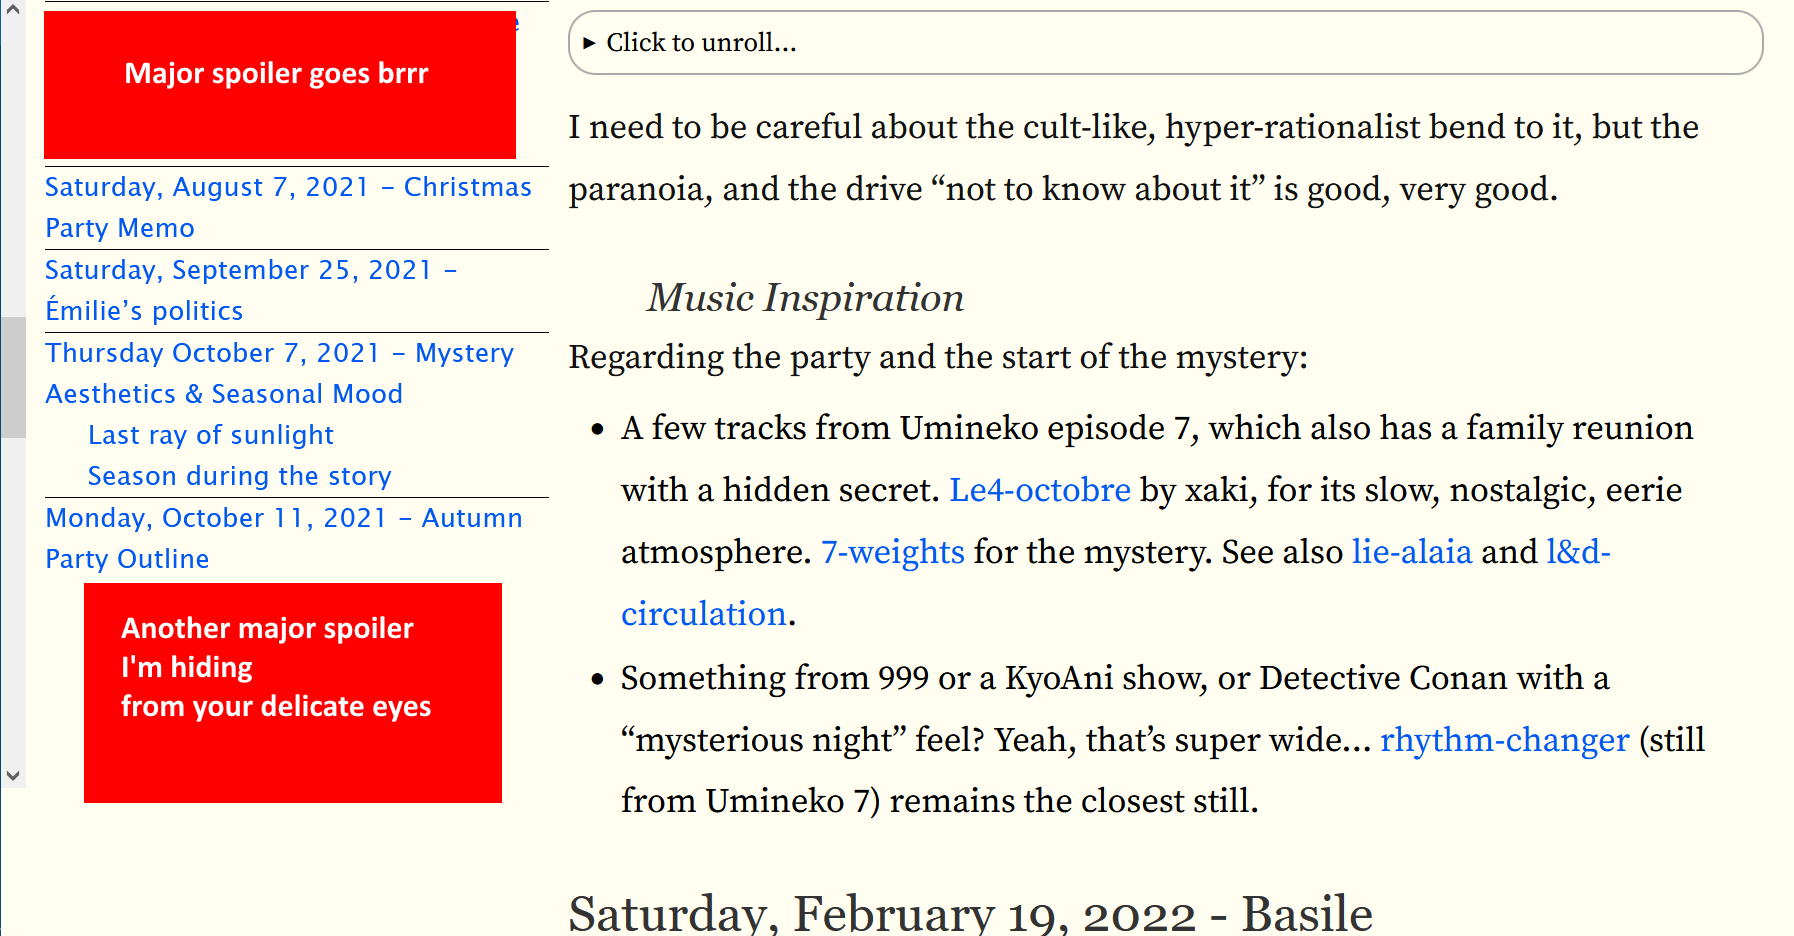 Screenshot of a webpage featuring a scrollable table of contents with chronological diary entry titles on the left, and the contents of the entry being read on the main part on the right. The entry being read has a sub-section titled "Music Inspiration" where several tracks from the episode 7 of Umineko are listed as potential inspirations (Le4-octobre, 7-weights, lie-alaia, l&d-circulation, rhythm-changer).